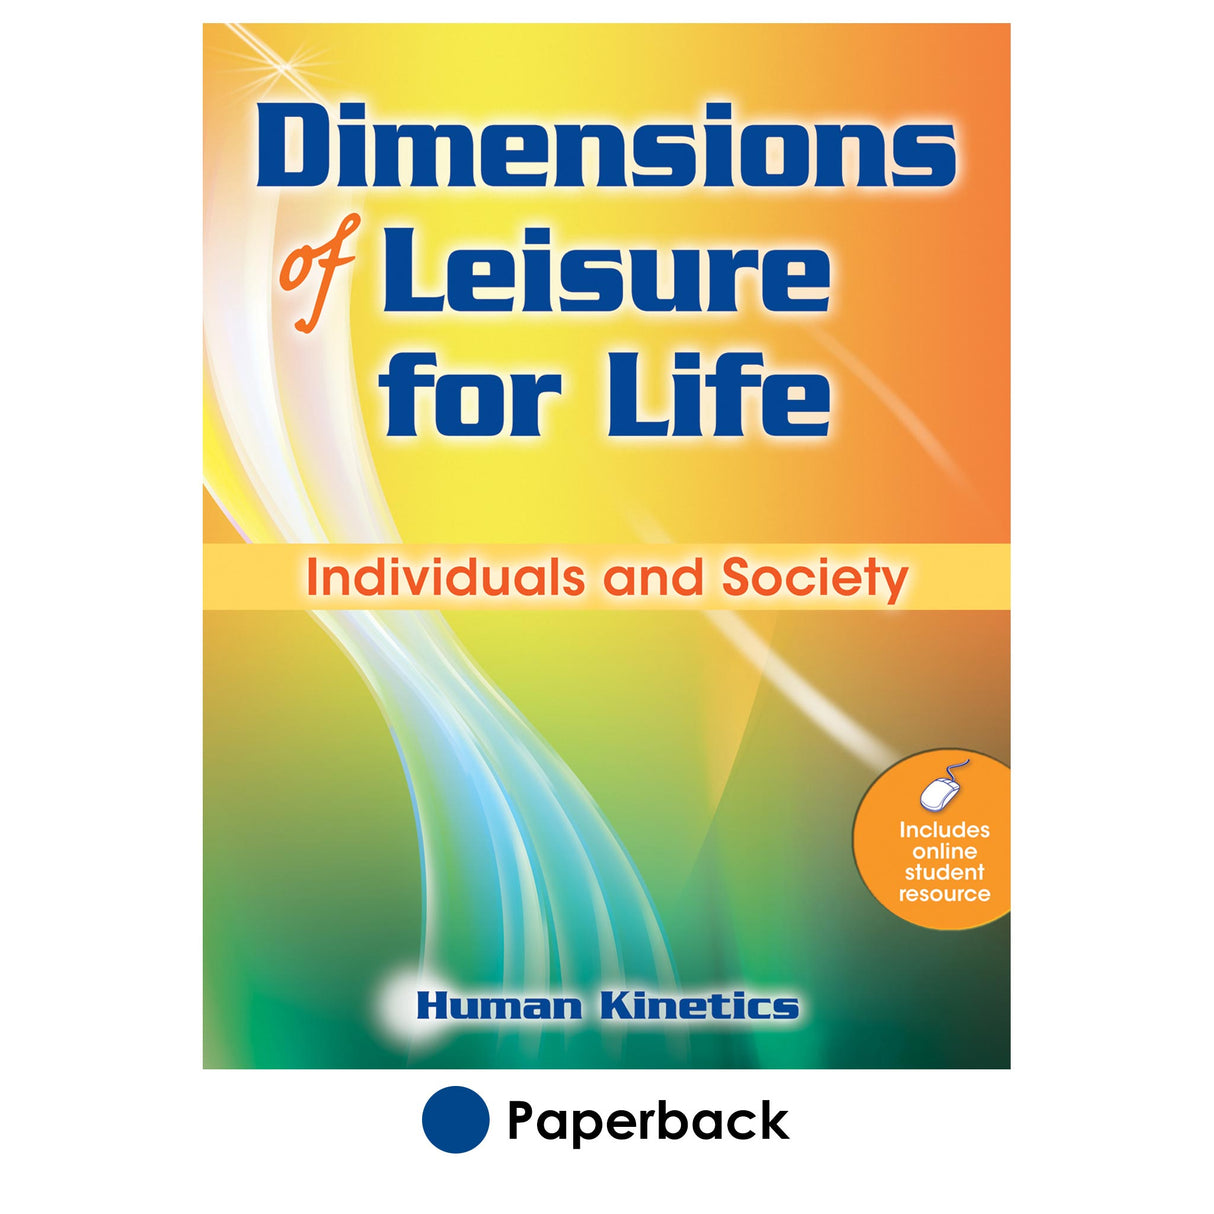 Dimensions of Leisure for Life